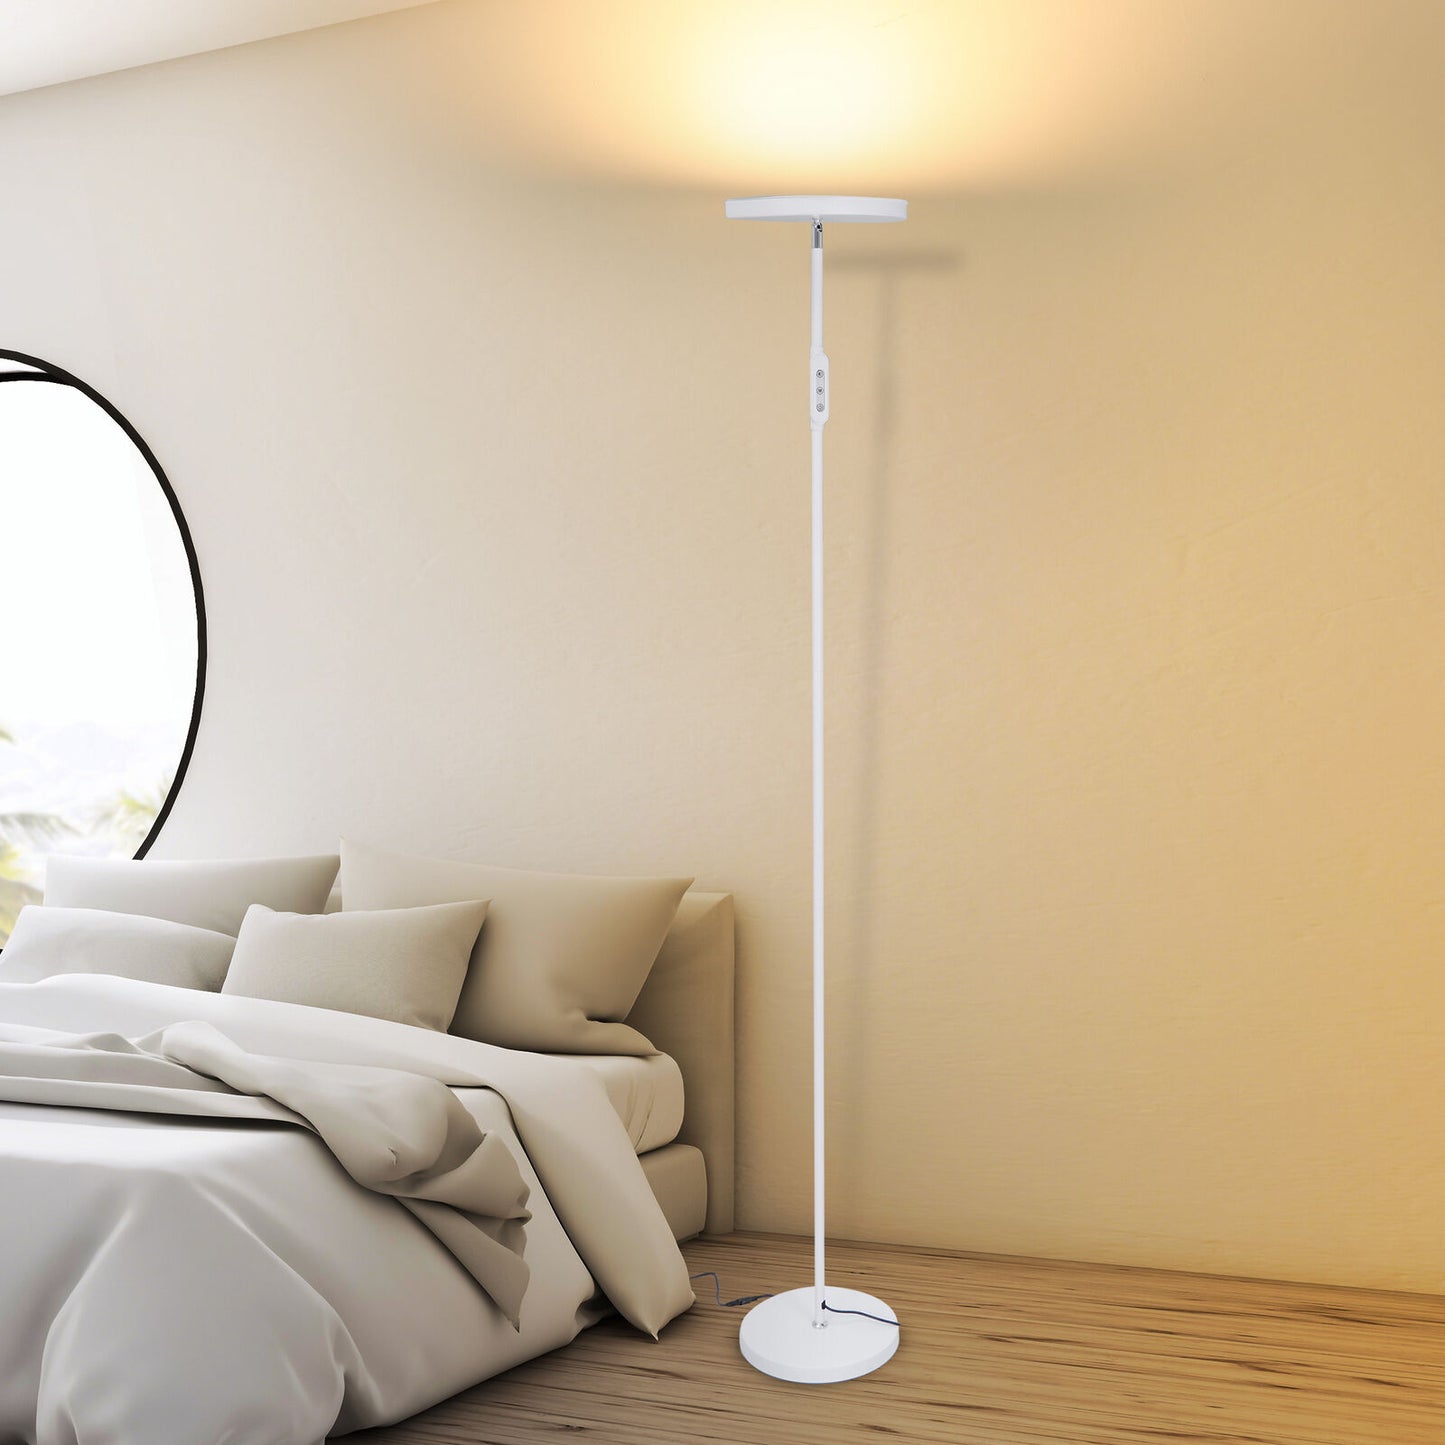 LED Floor Lamp Bright Lighting Floor Lamps for Living Rooms Bedrooms Office